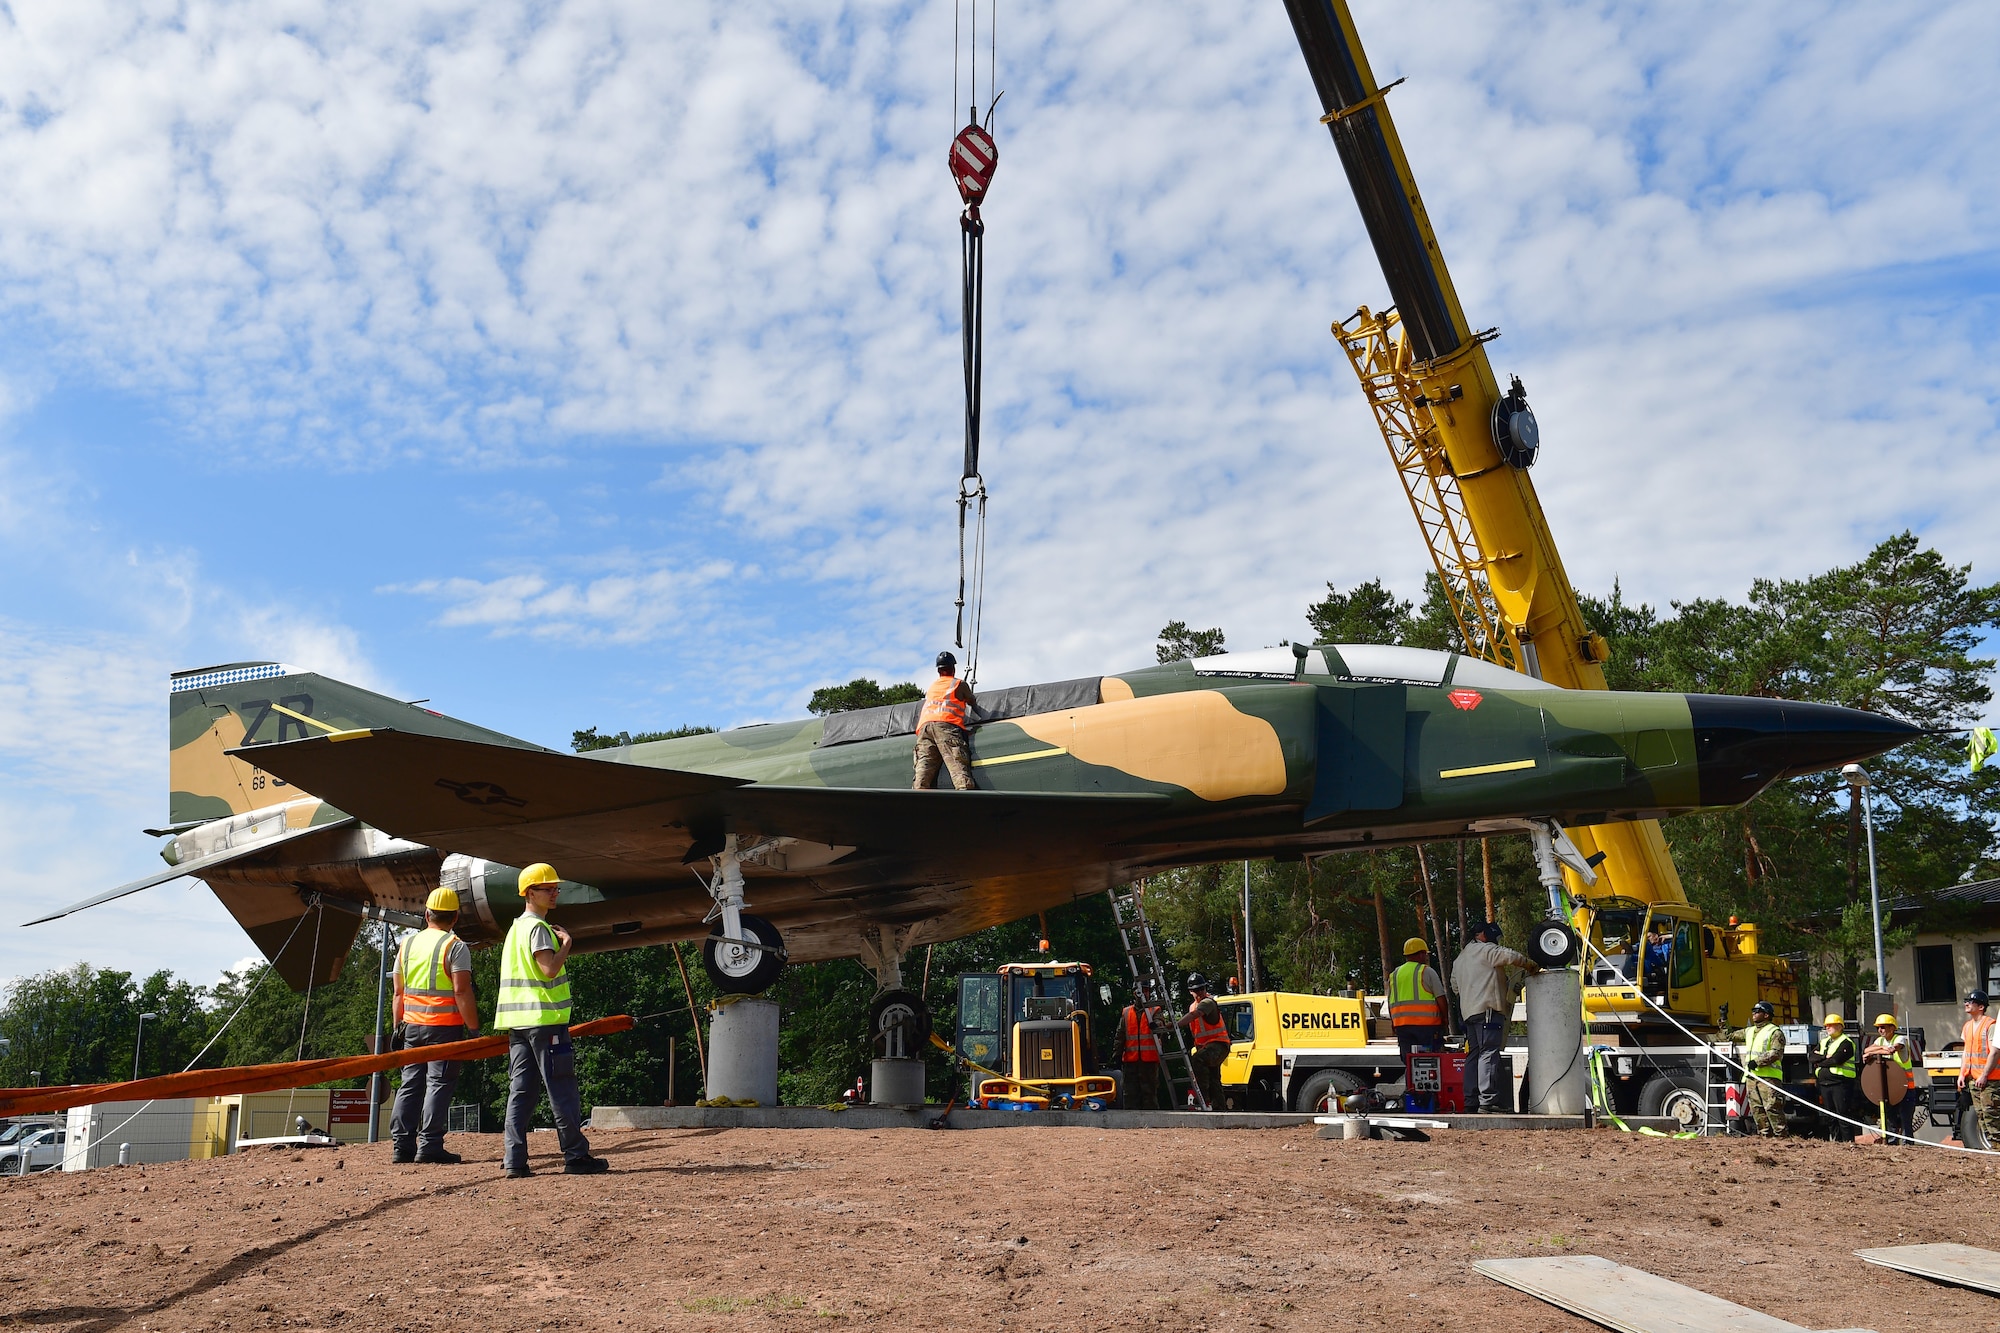 Workers install an aircraft for static display.